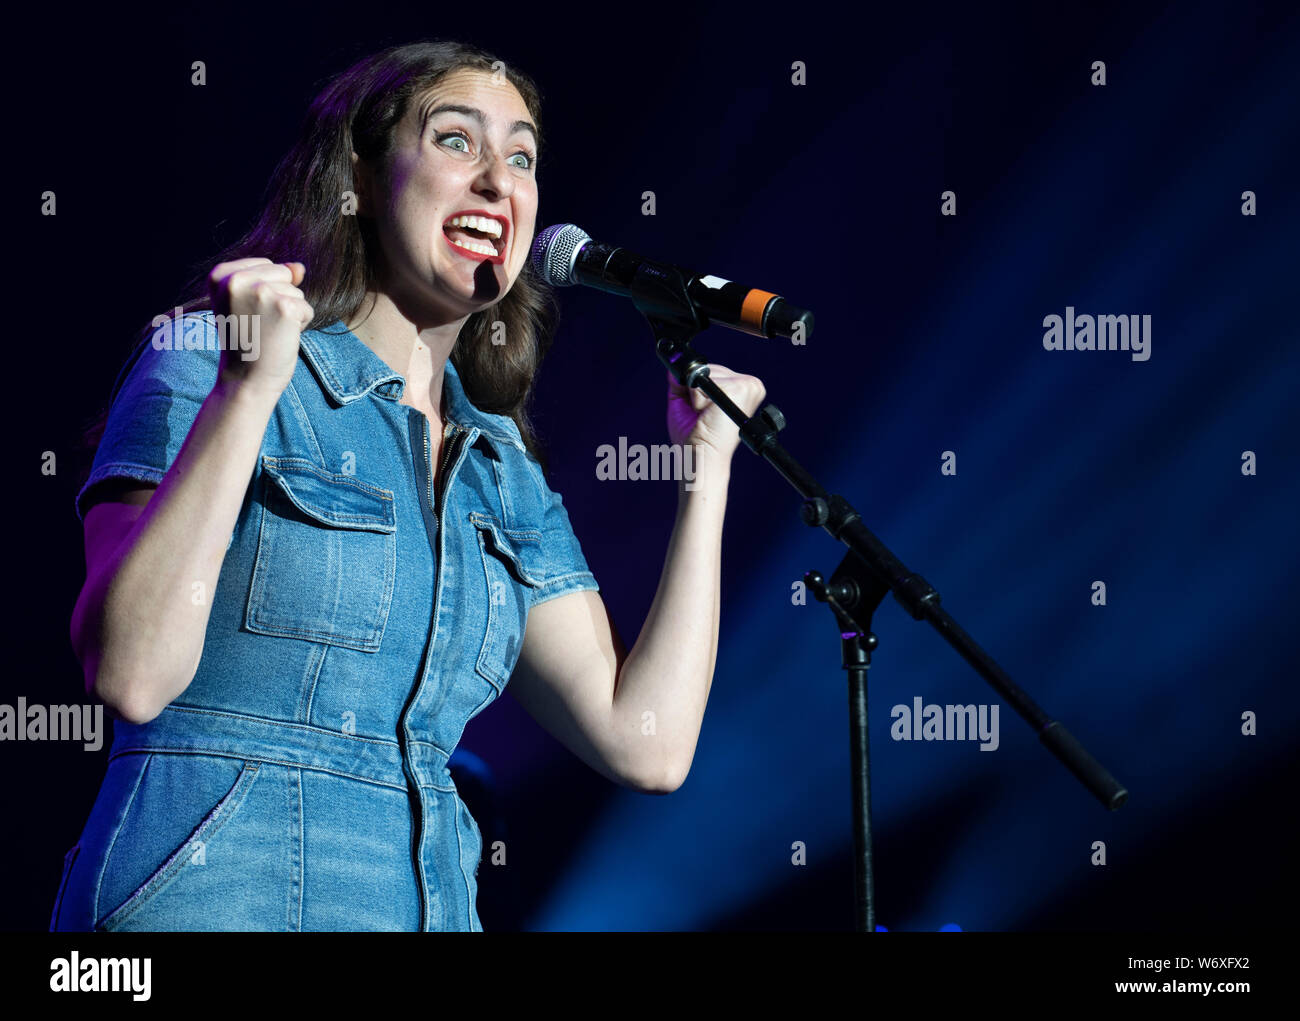 Edinburgh, Scotland, UK. 3 August 2019. The Pleasance Opening Gala launch at the Edinburgh Fringe Festival. The Pleasance venues are back for their 35th season with more than 270 shows. Pictured; Catherine Cohen. Iain Masterton/Alamy Live News Stock Photo